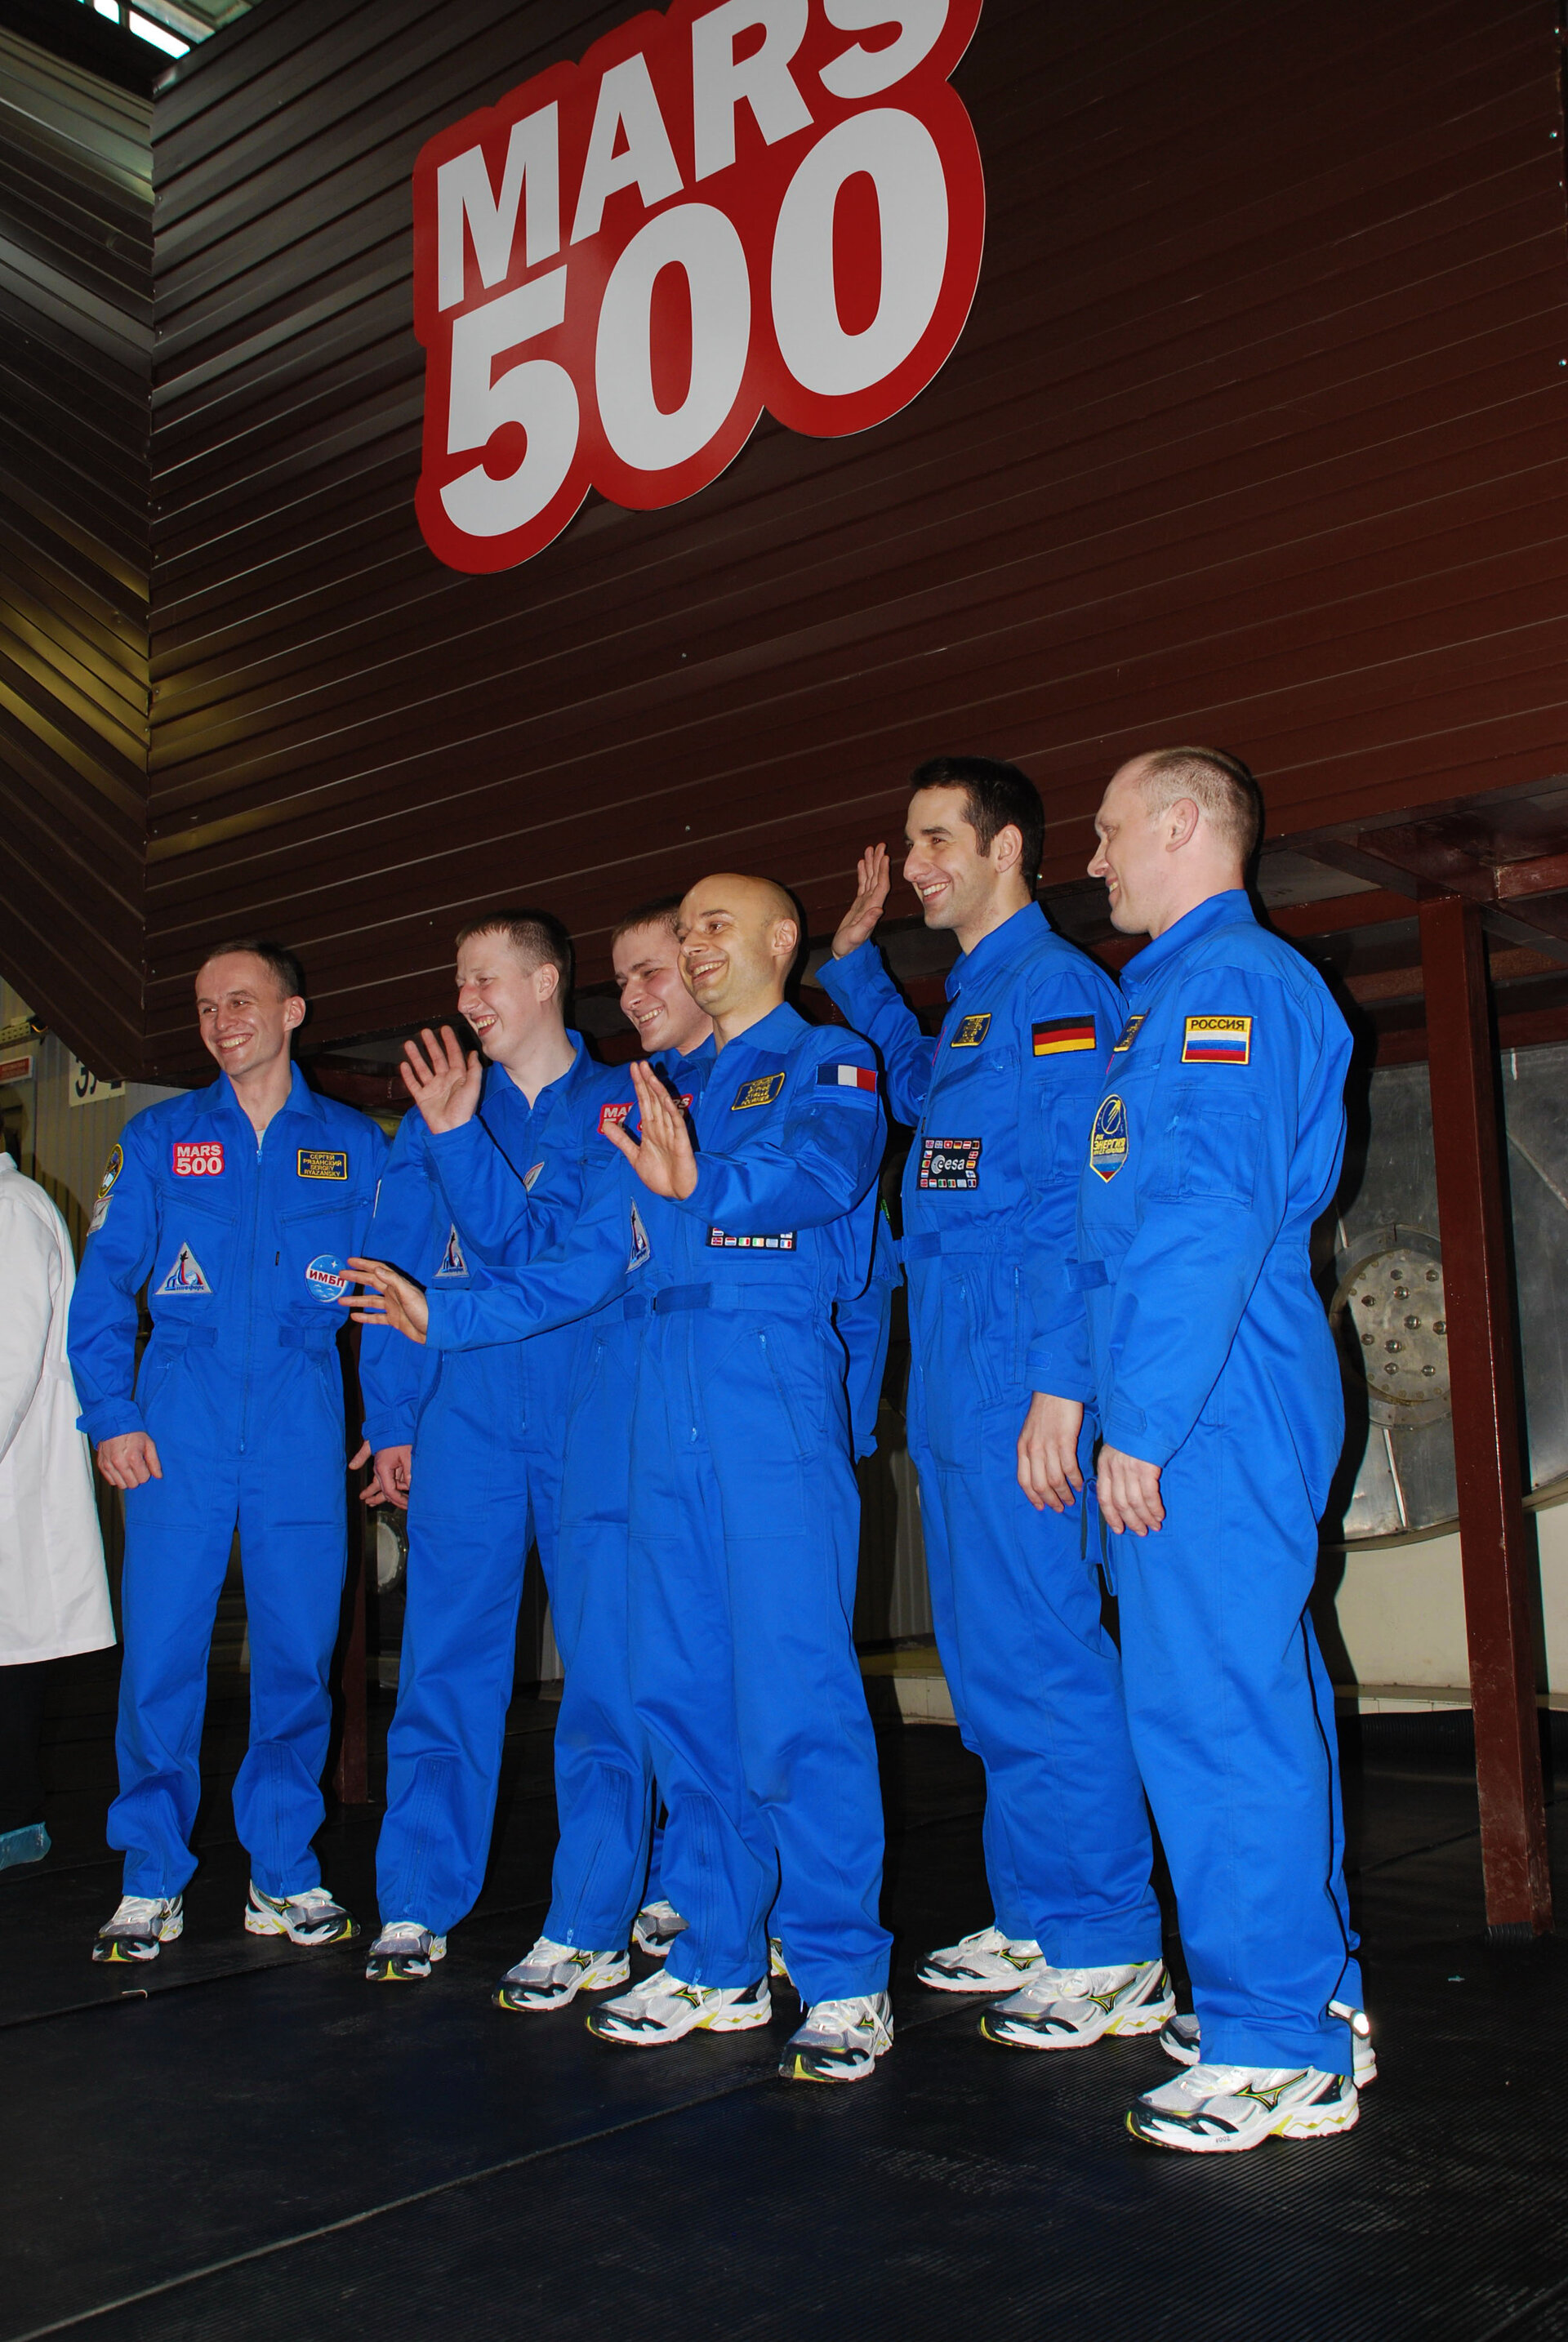 Mars500 crew prepares to enter the isolation facility for 105-day study